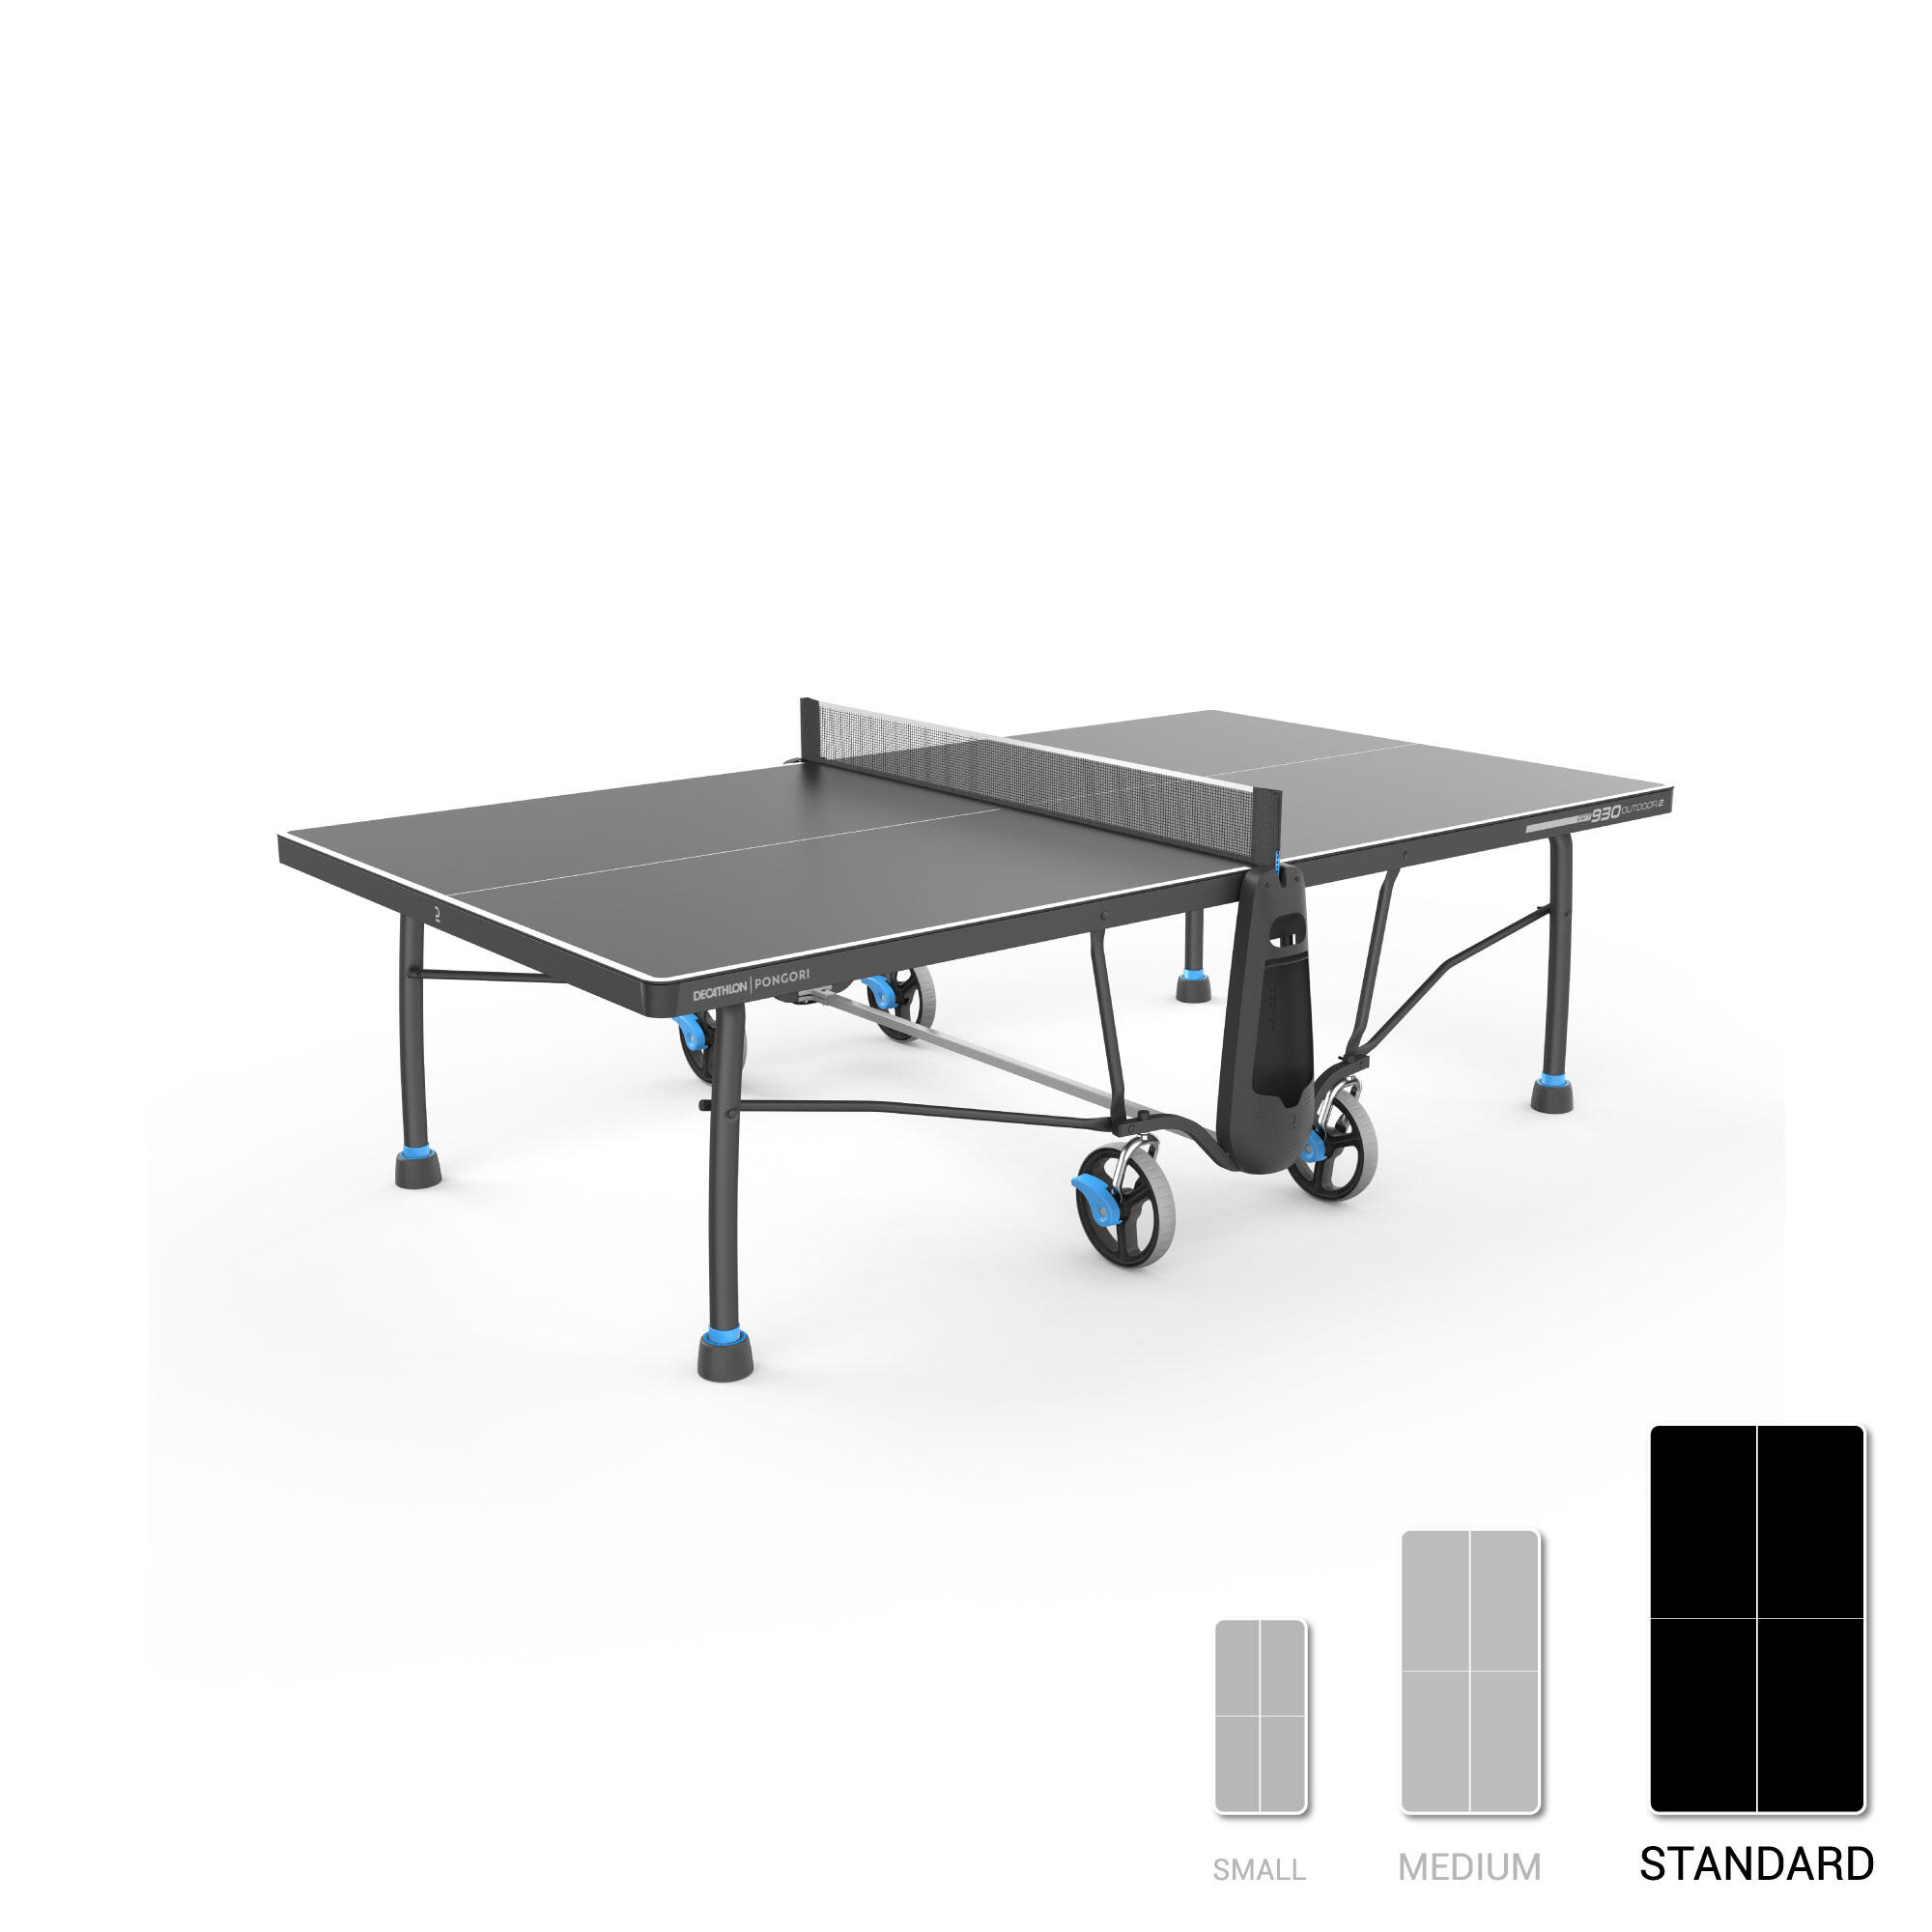 Outdoor Table Tennis Table PPT 930.2 With Cover - Black 5/16